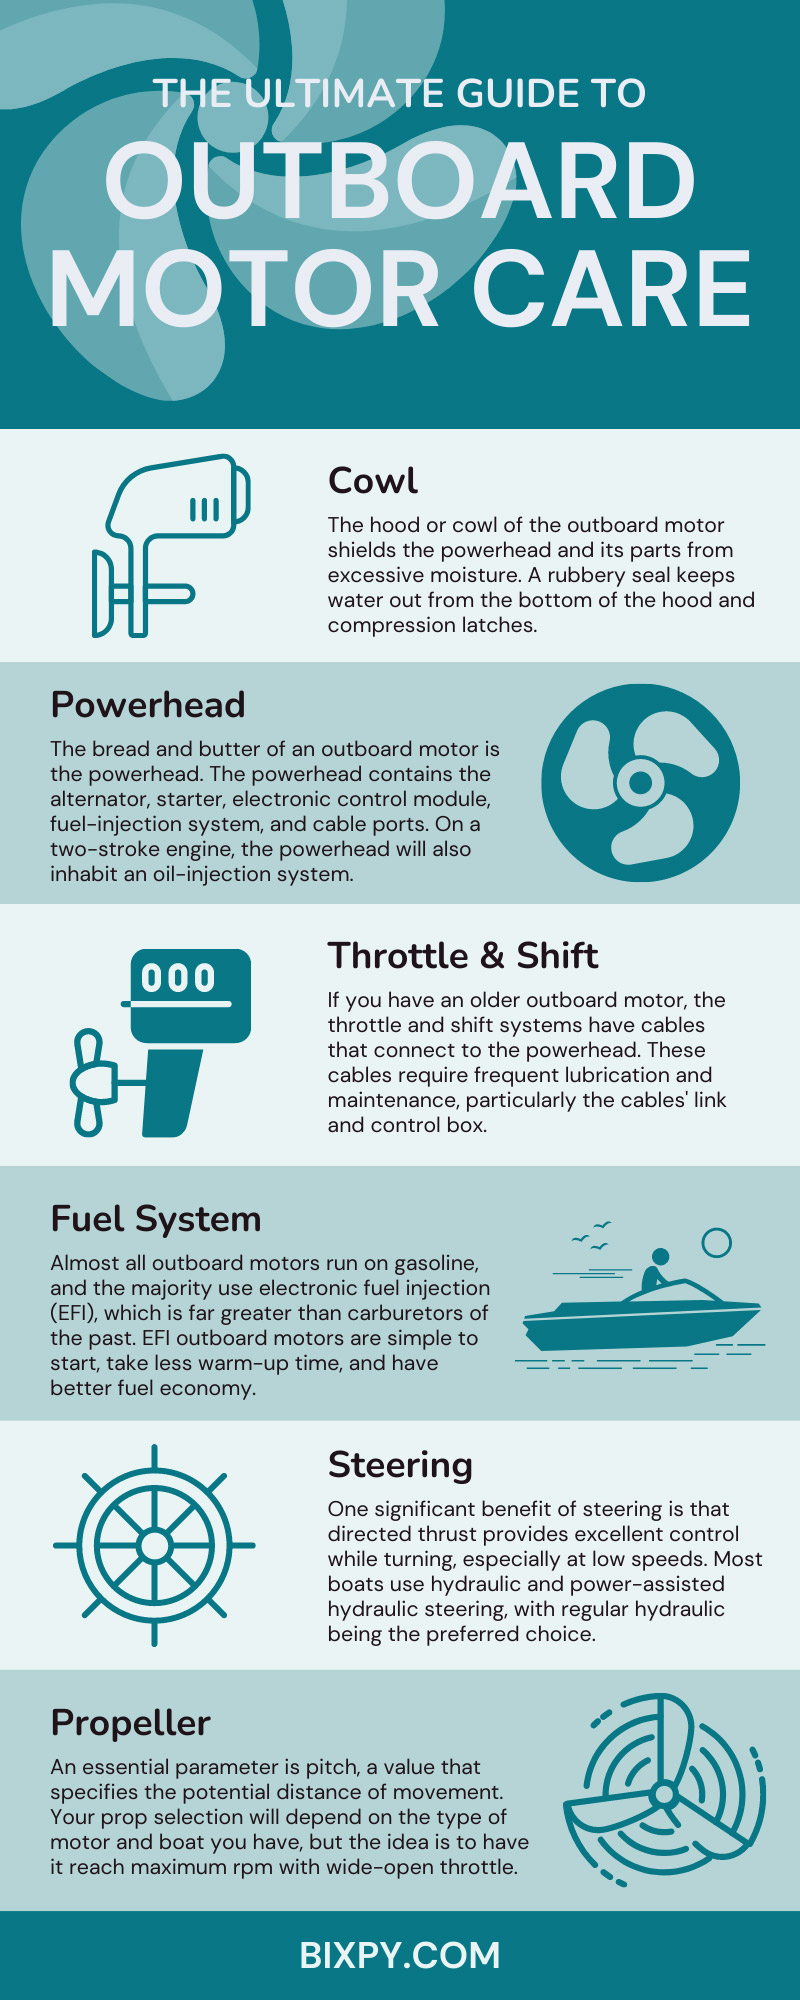 The Ultimate Guide to Outboard Motor Care